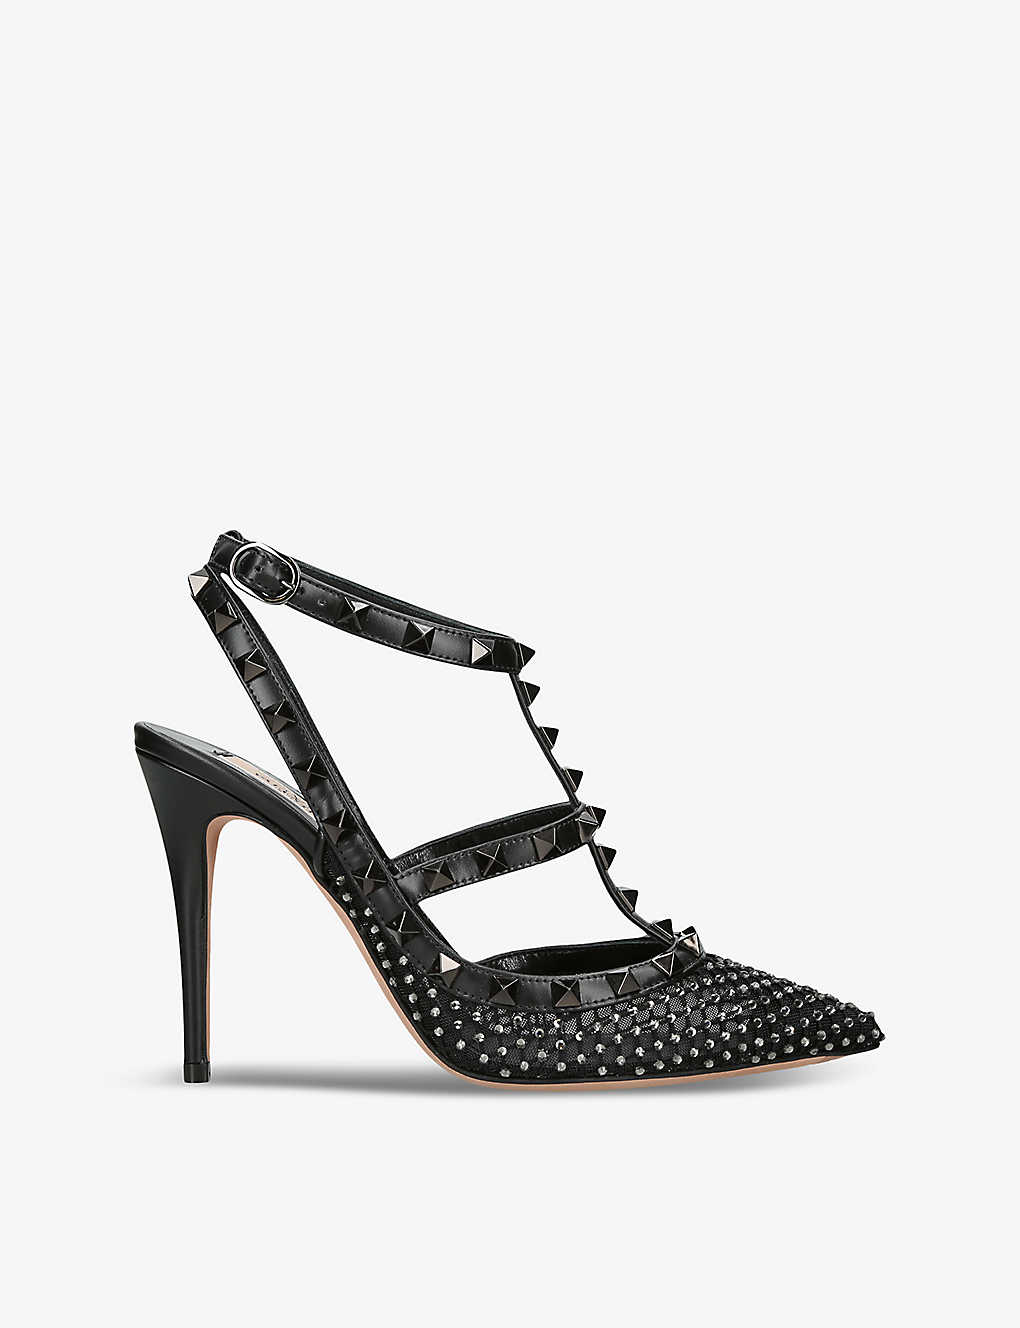 Valentino Garavani So Noir 100 Studded Leather Courts In Blk/other